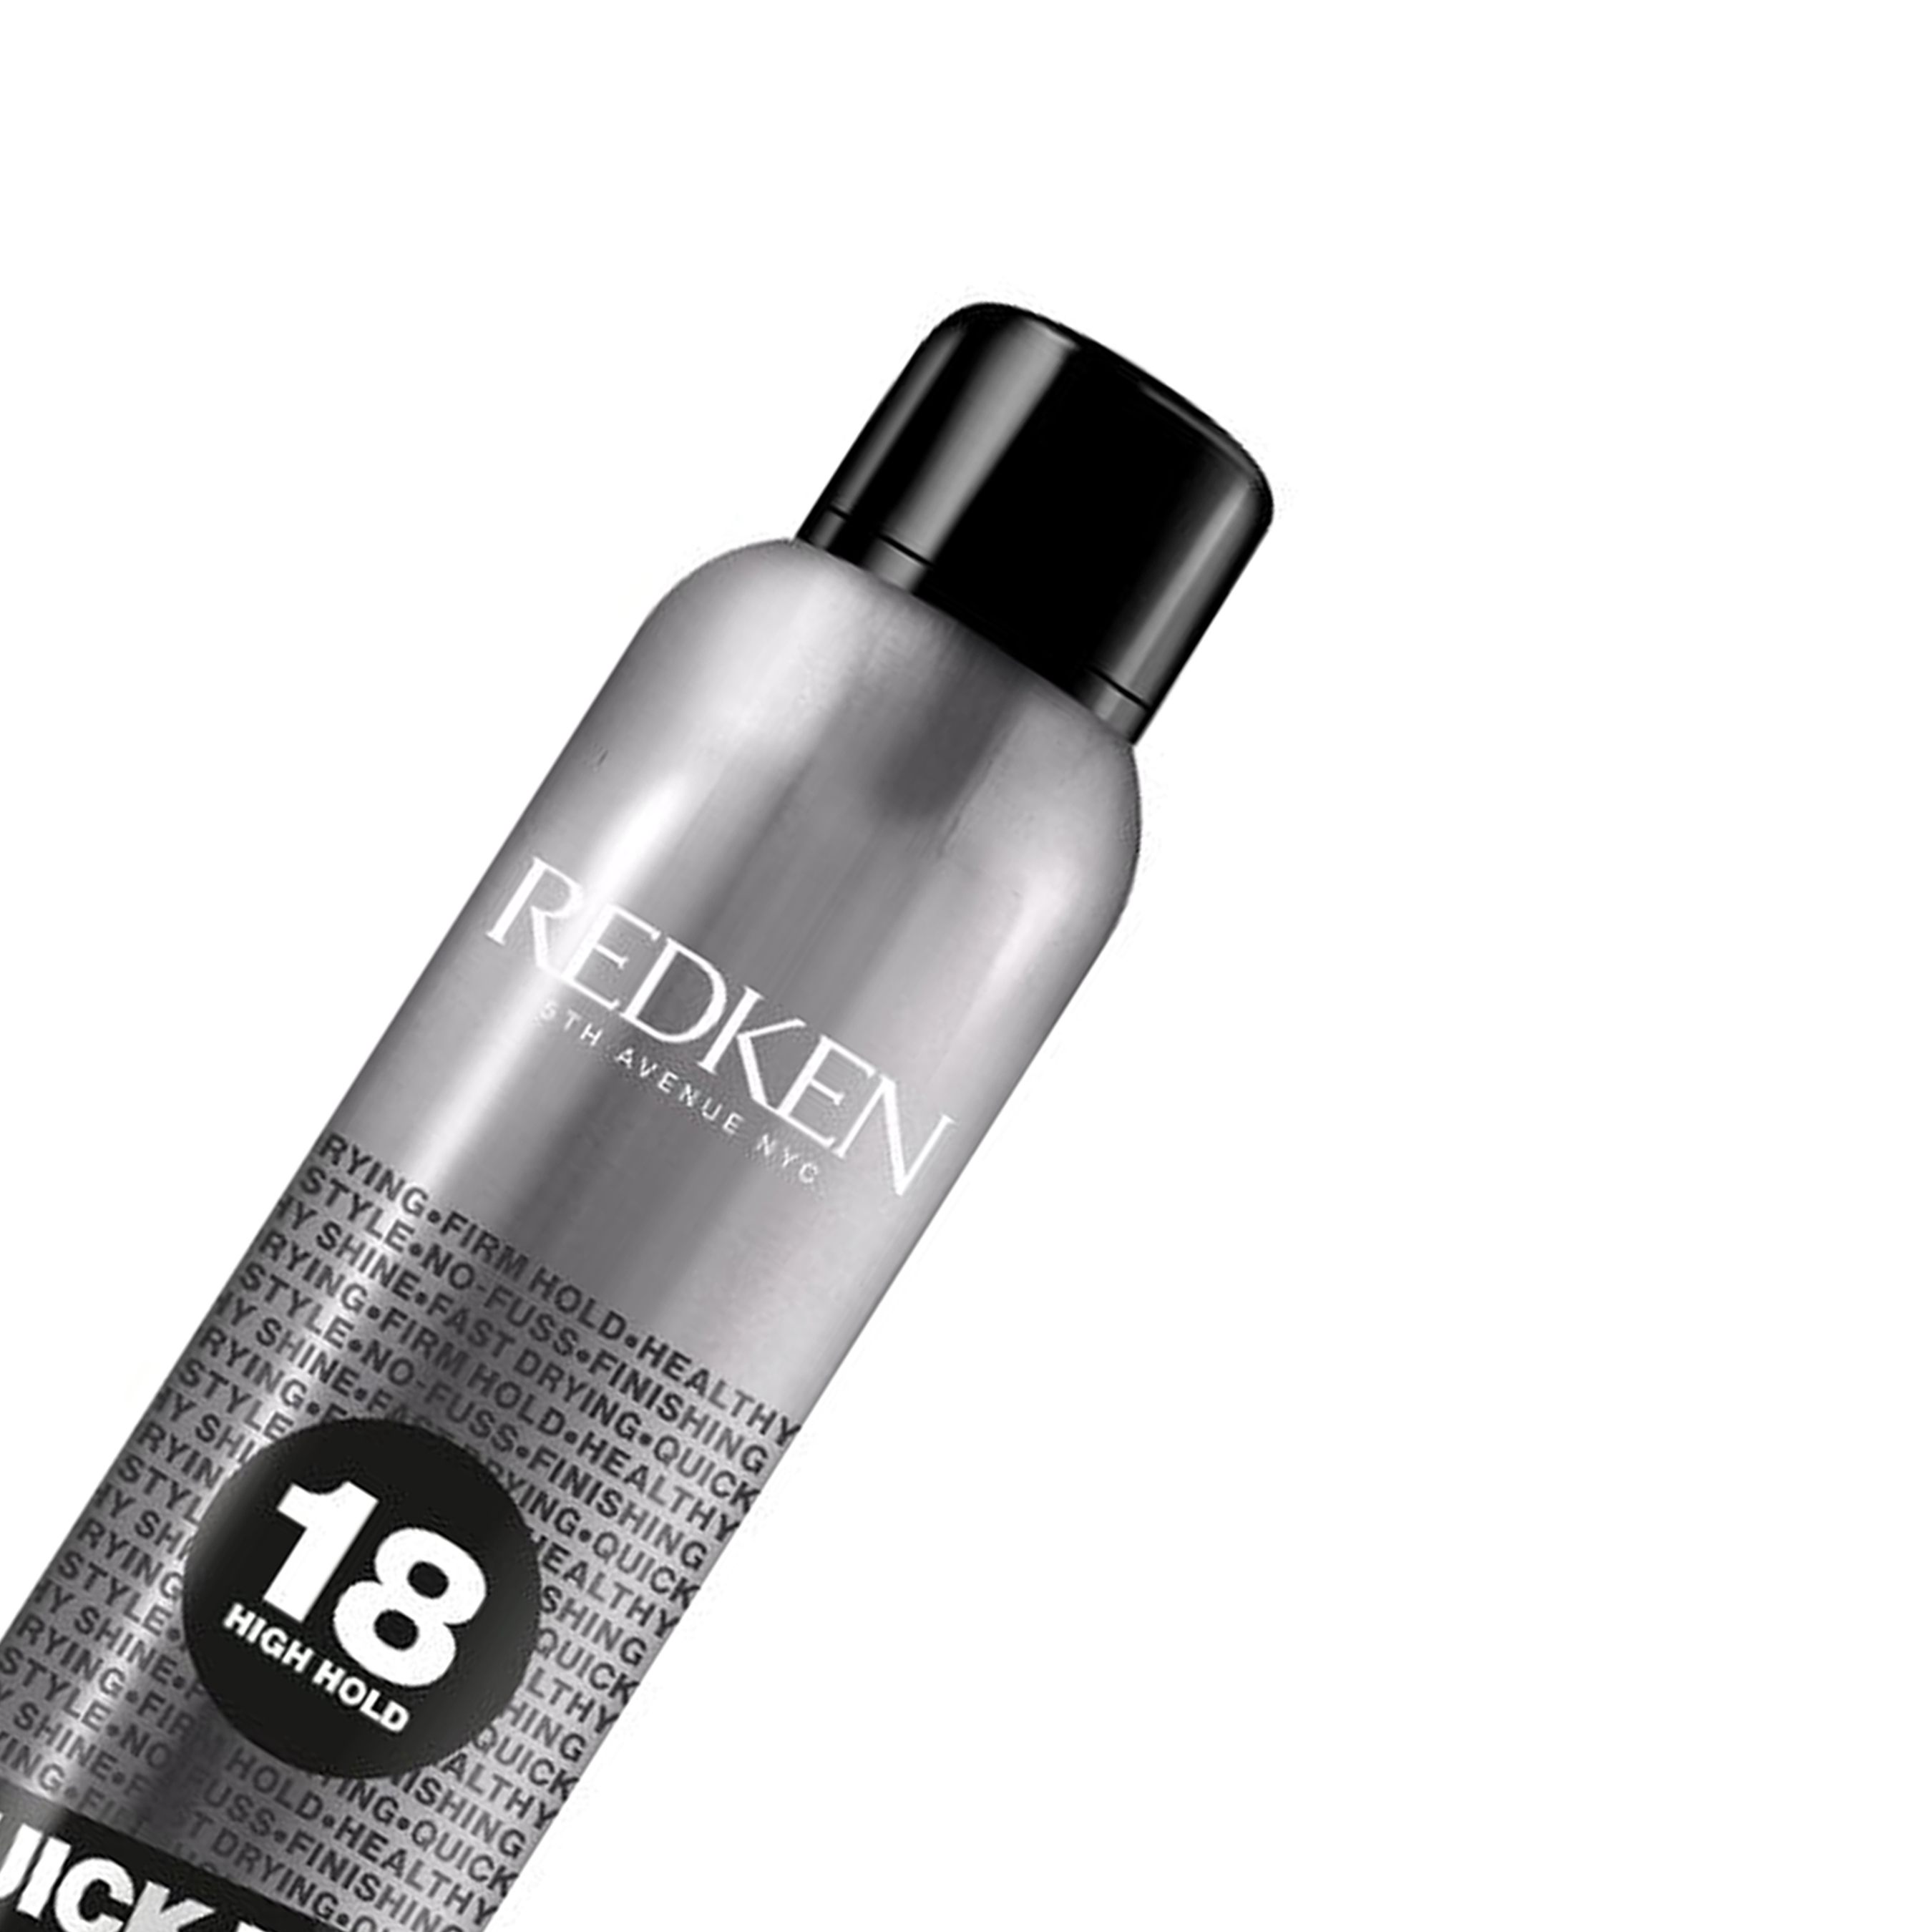 REDKEN QUICK DRY 18 INSTANT FINISHING HAIRSPRAY 9.8 OZ - image 5 of 5